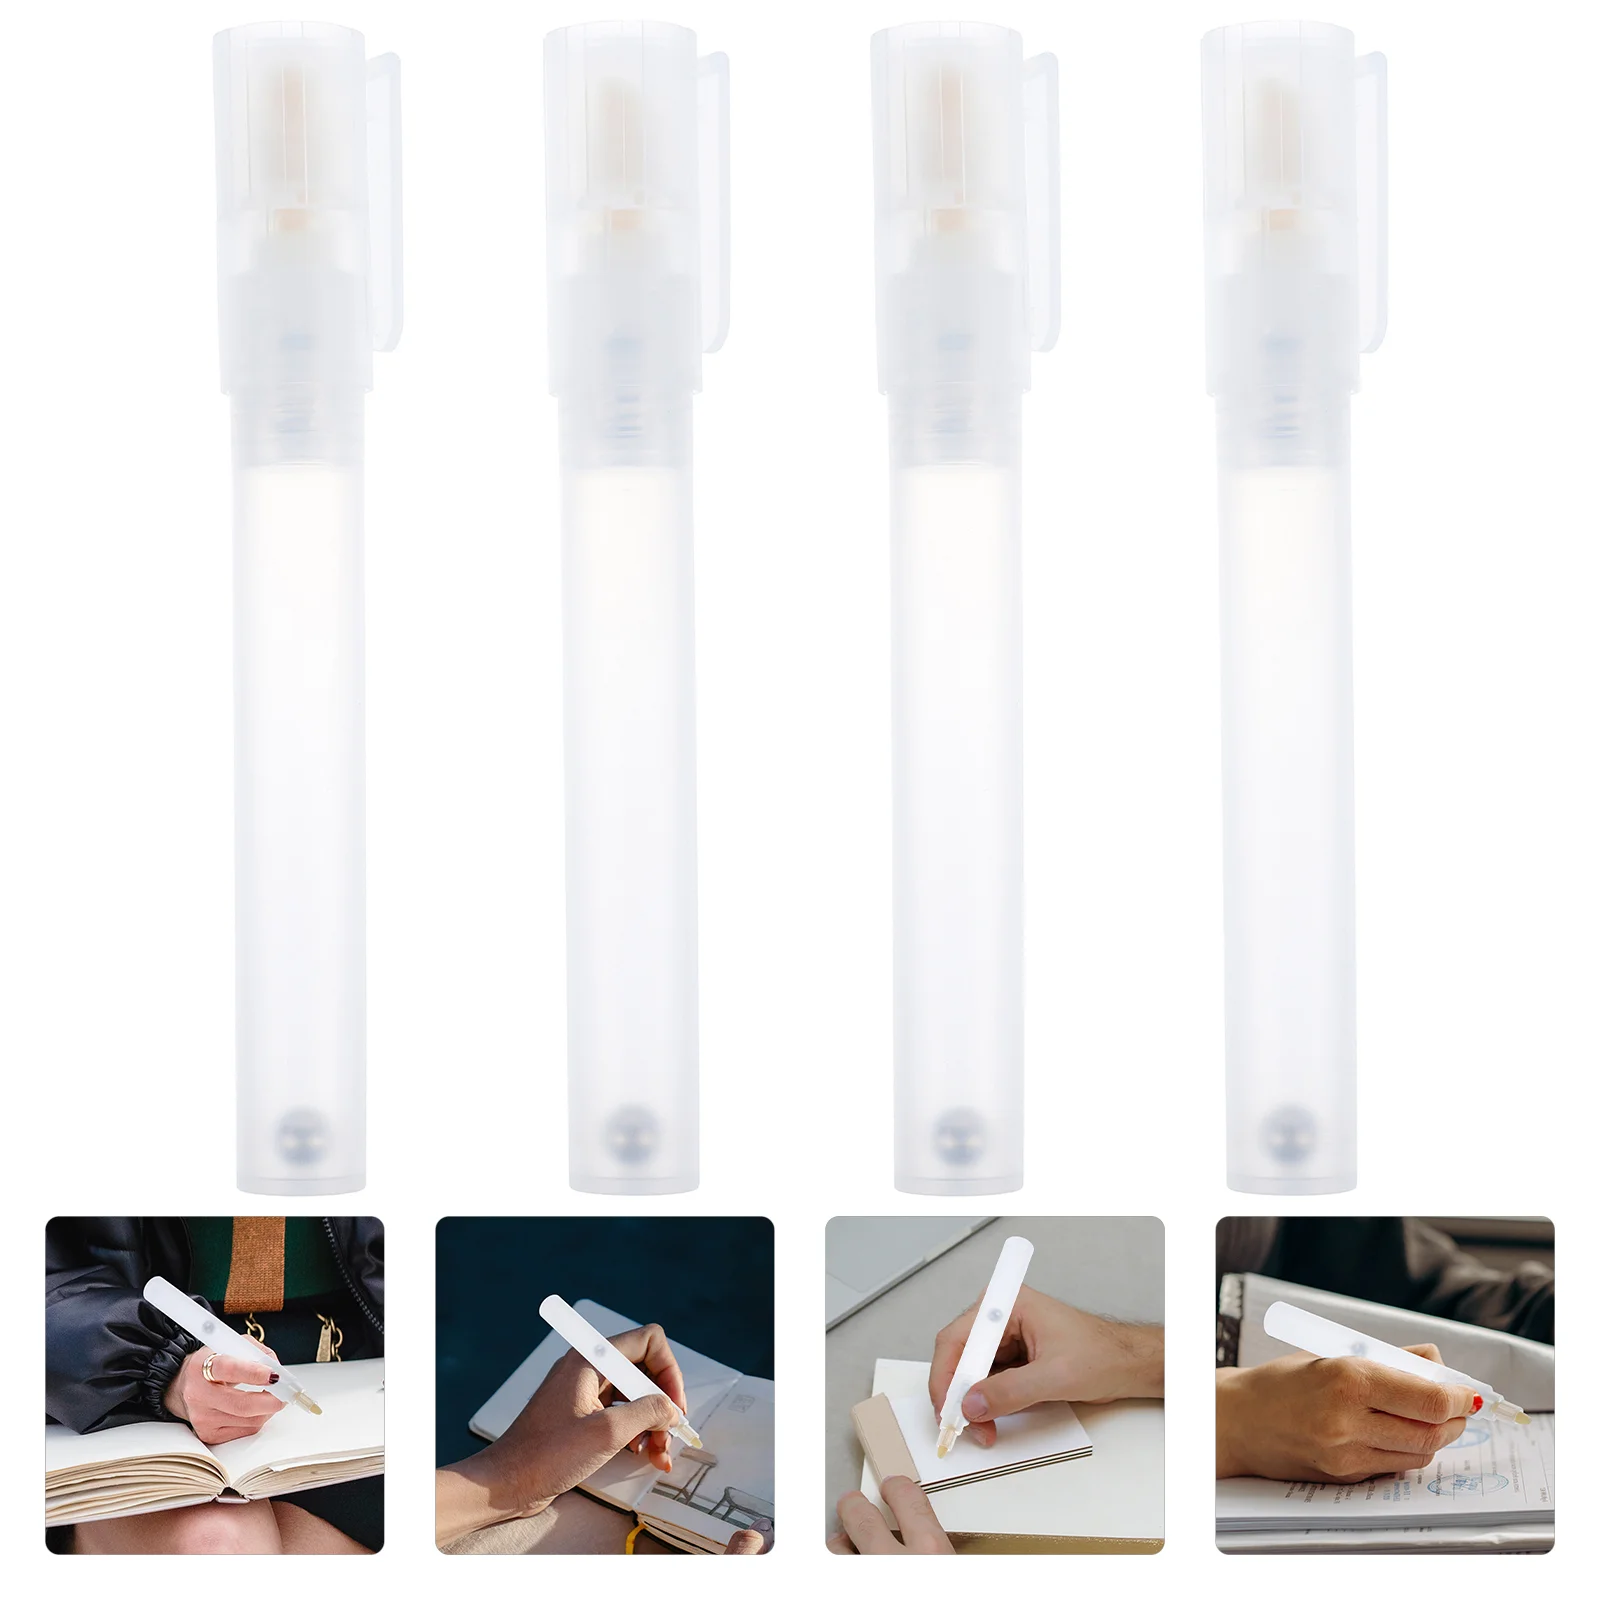 

4 Pcs Refillable Paint Pen Painting Marker Shell White Holders Pens for Walls Empty Student